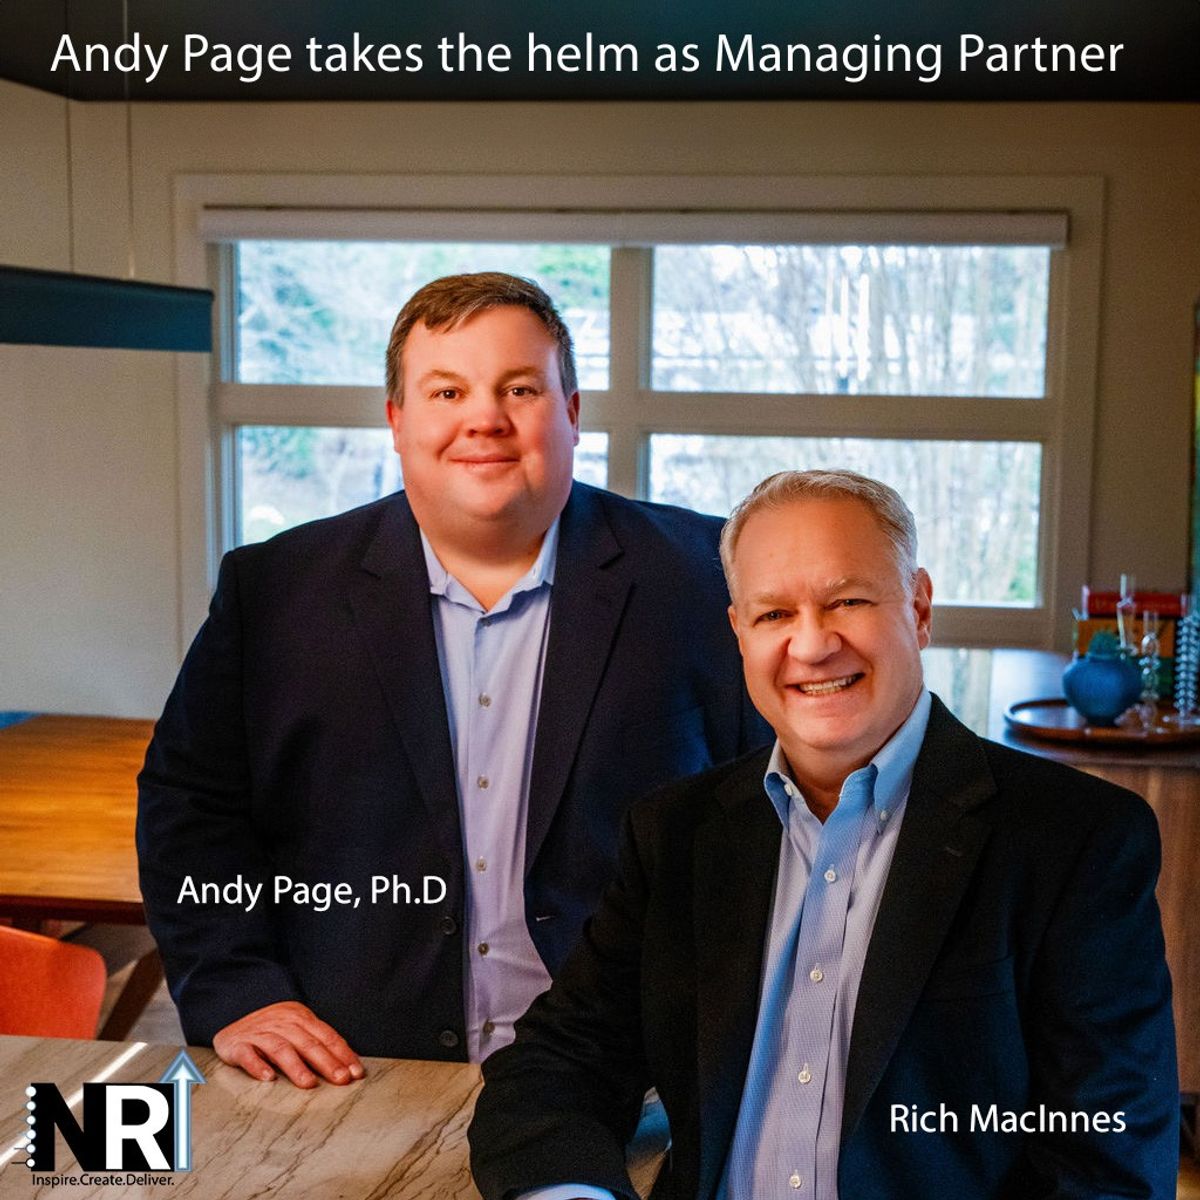 Andy Page takes the helm as Managing Partner